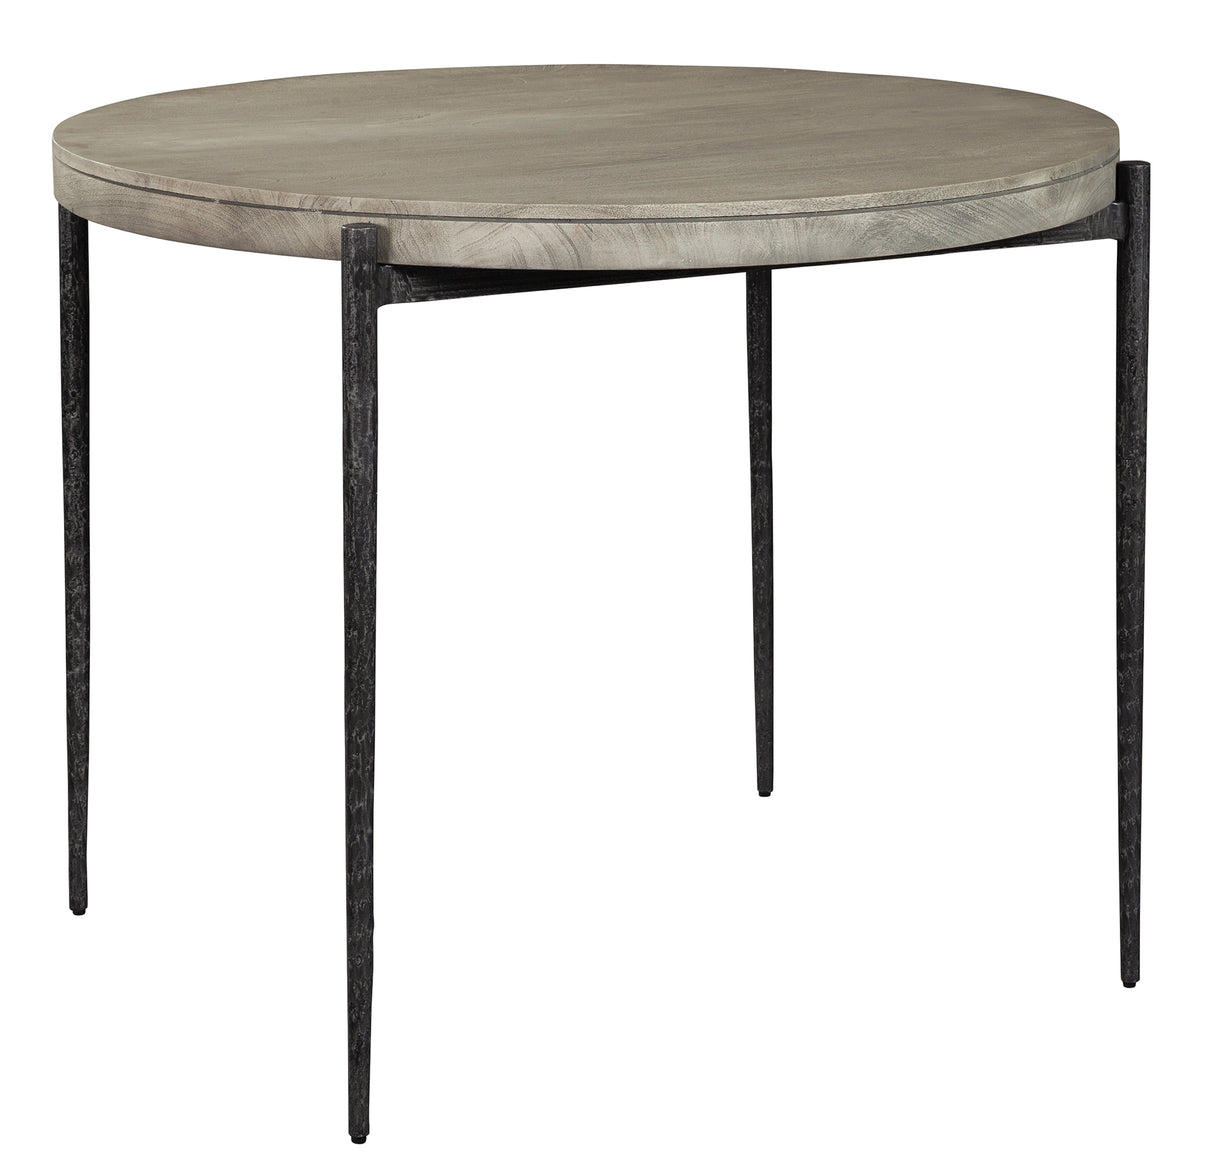 Hekman 24928 Bedford Park 45in. x 45in. x 35.25in. Pub Table